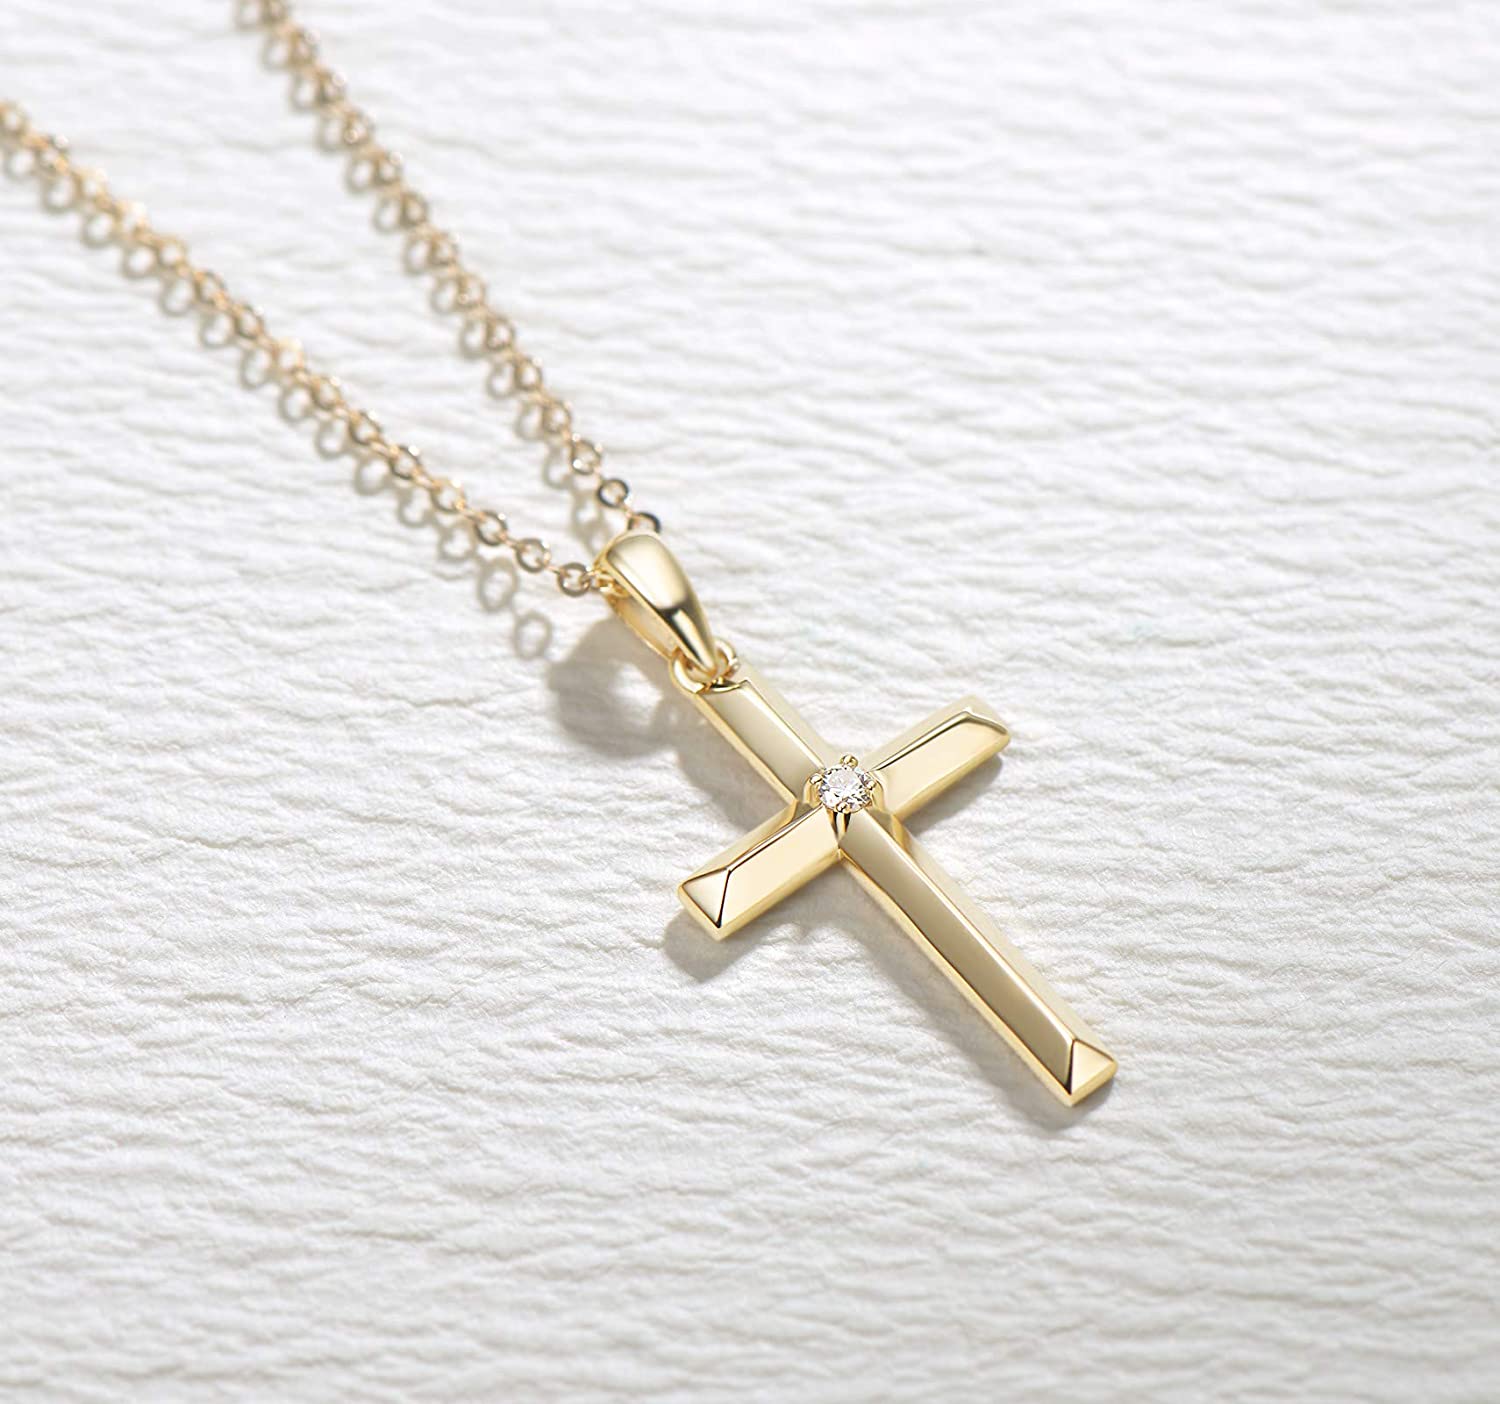 FANCIME "Faith In Heart" 14K Yellow Gold Diamond Cross Necklace Detail